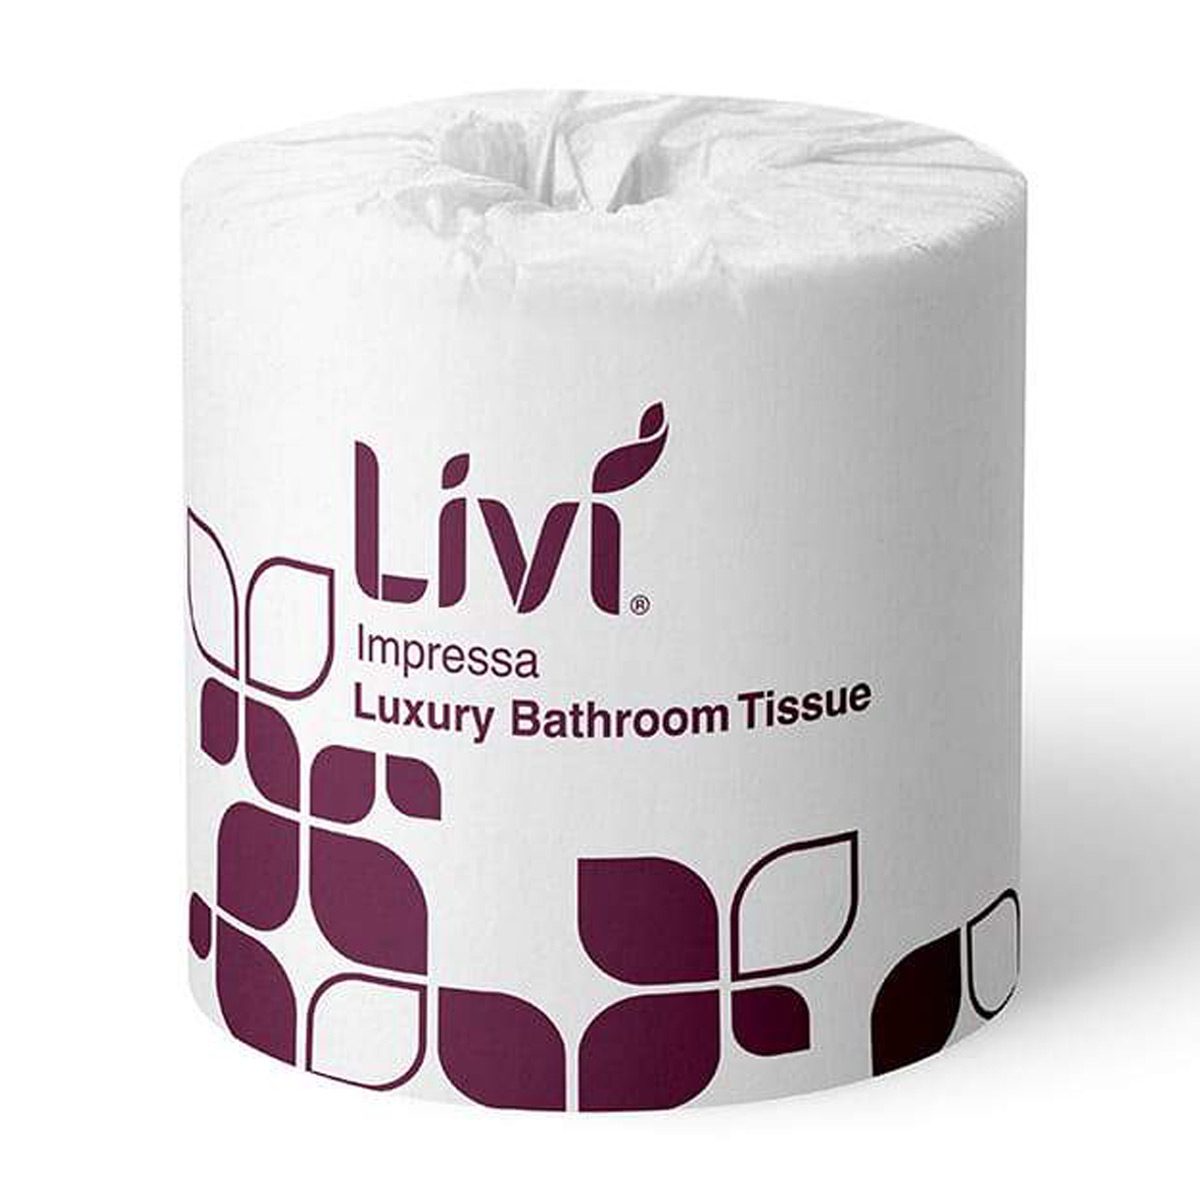 paper-products-toilet-paper-livi-impressa-3-ply-toilet-paper-2250-sheets-x48-rolls-wrapped-individually-wrapped-for-hygiene-soft-absorbent-embossed-for-a-gentle-touch-vjs-distributors-3005